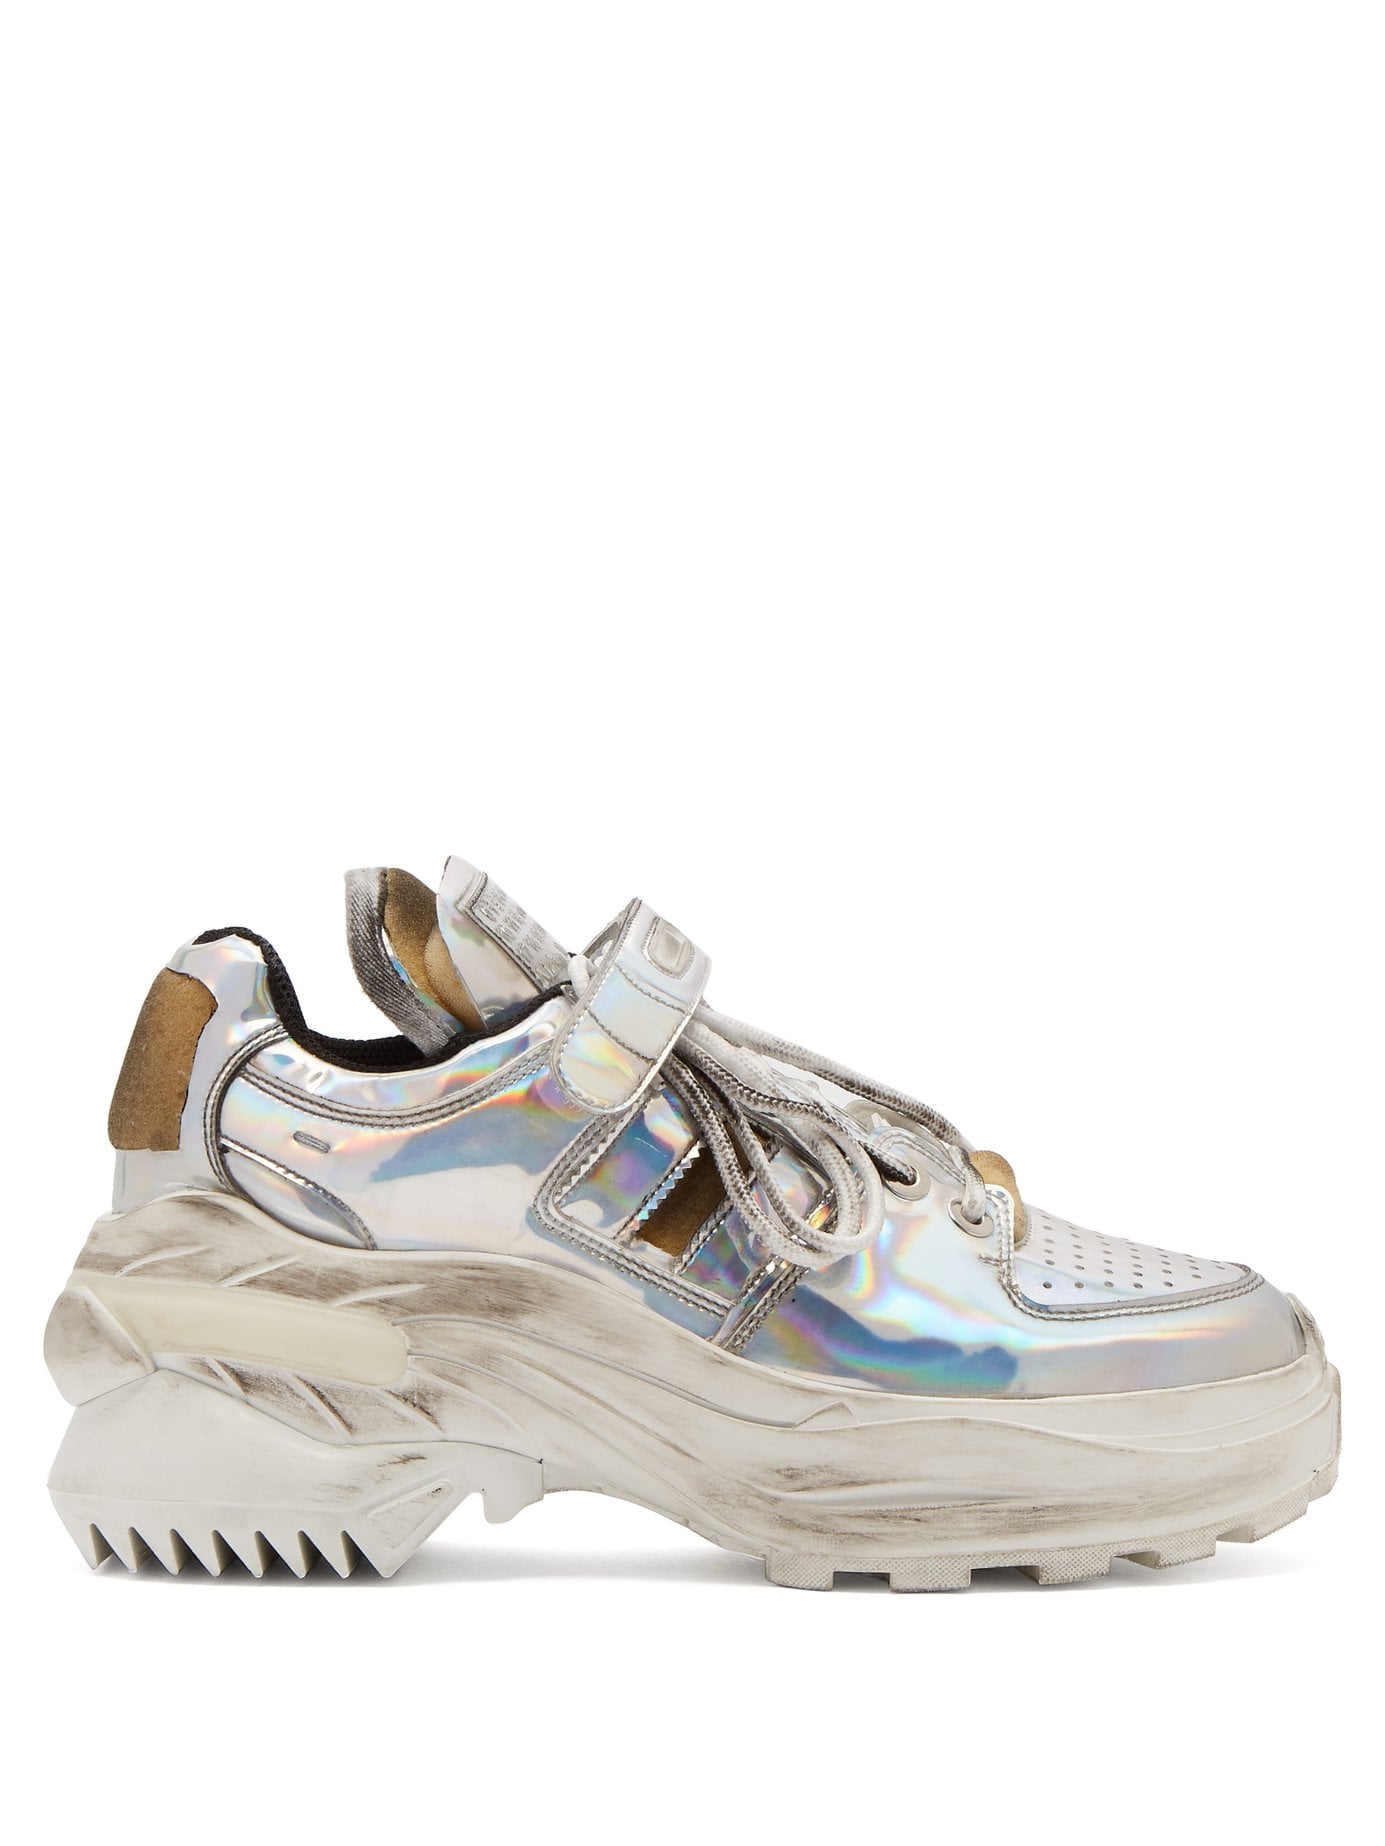 lijn gehandicapt Edele Maison Margiela Retro Fit Deconstructed Low-Top Leather Trainers | 25 Cool  Sneakers That Beat Every Other Gift on Our Wishlists | POPSUGAR Fashion  Photo 21